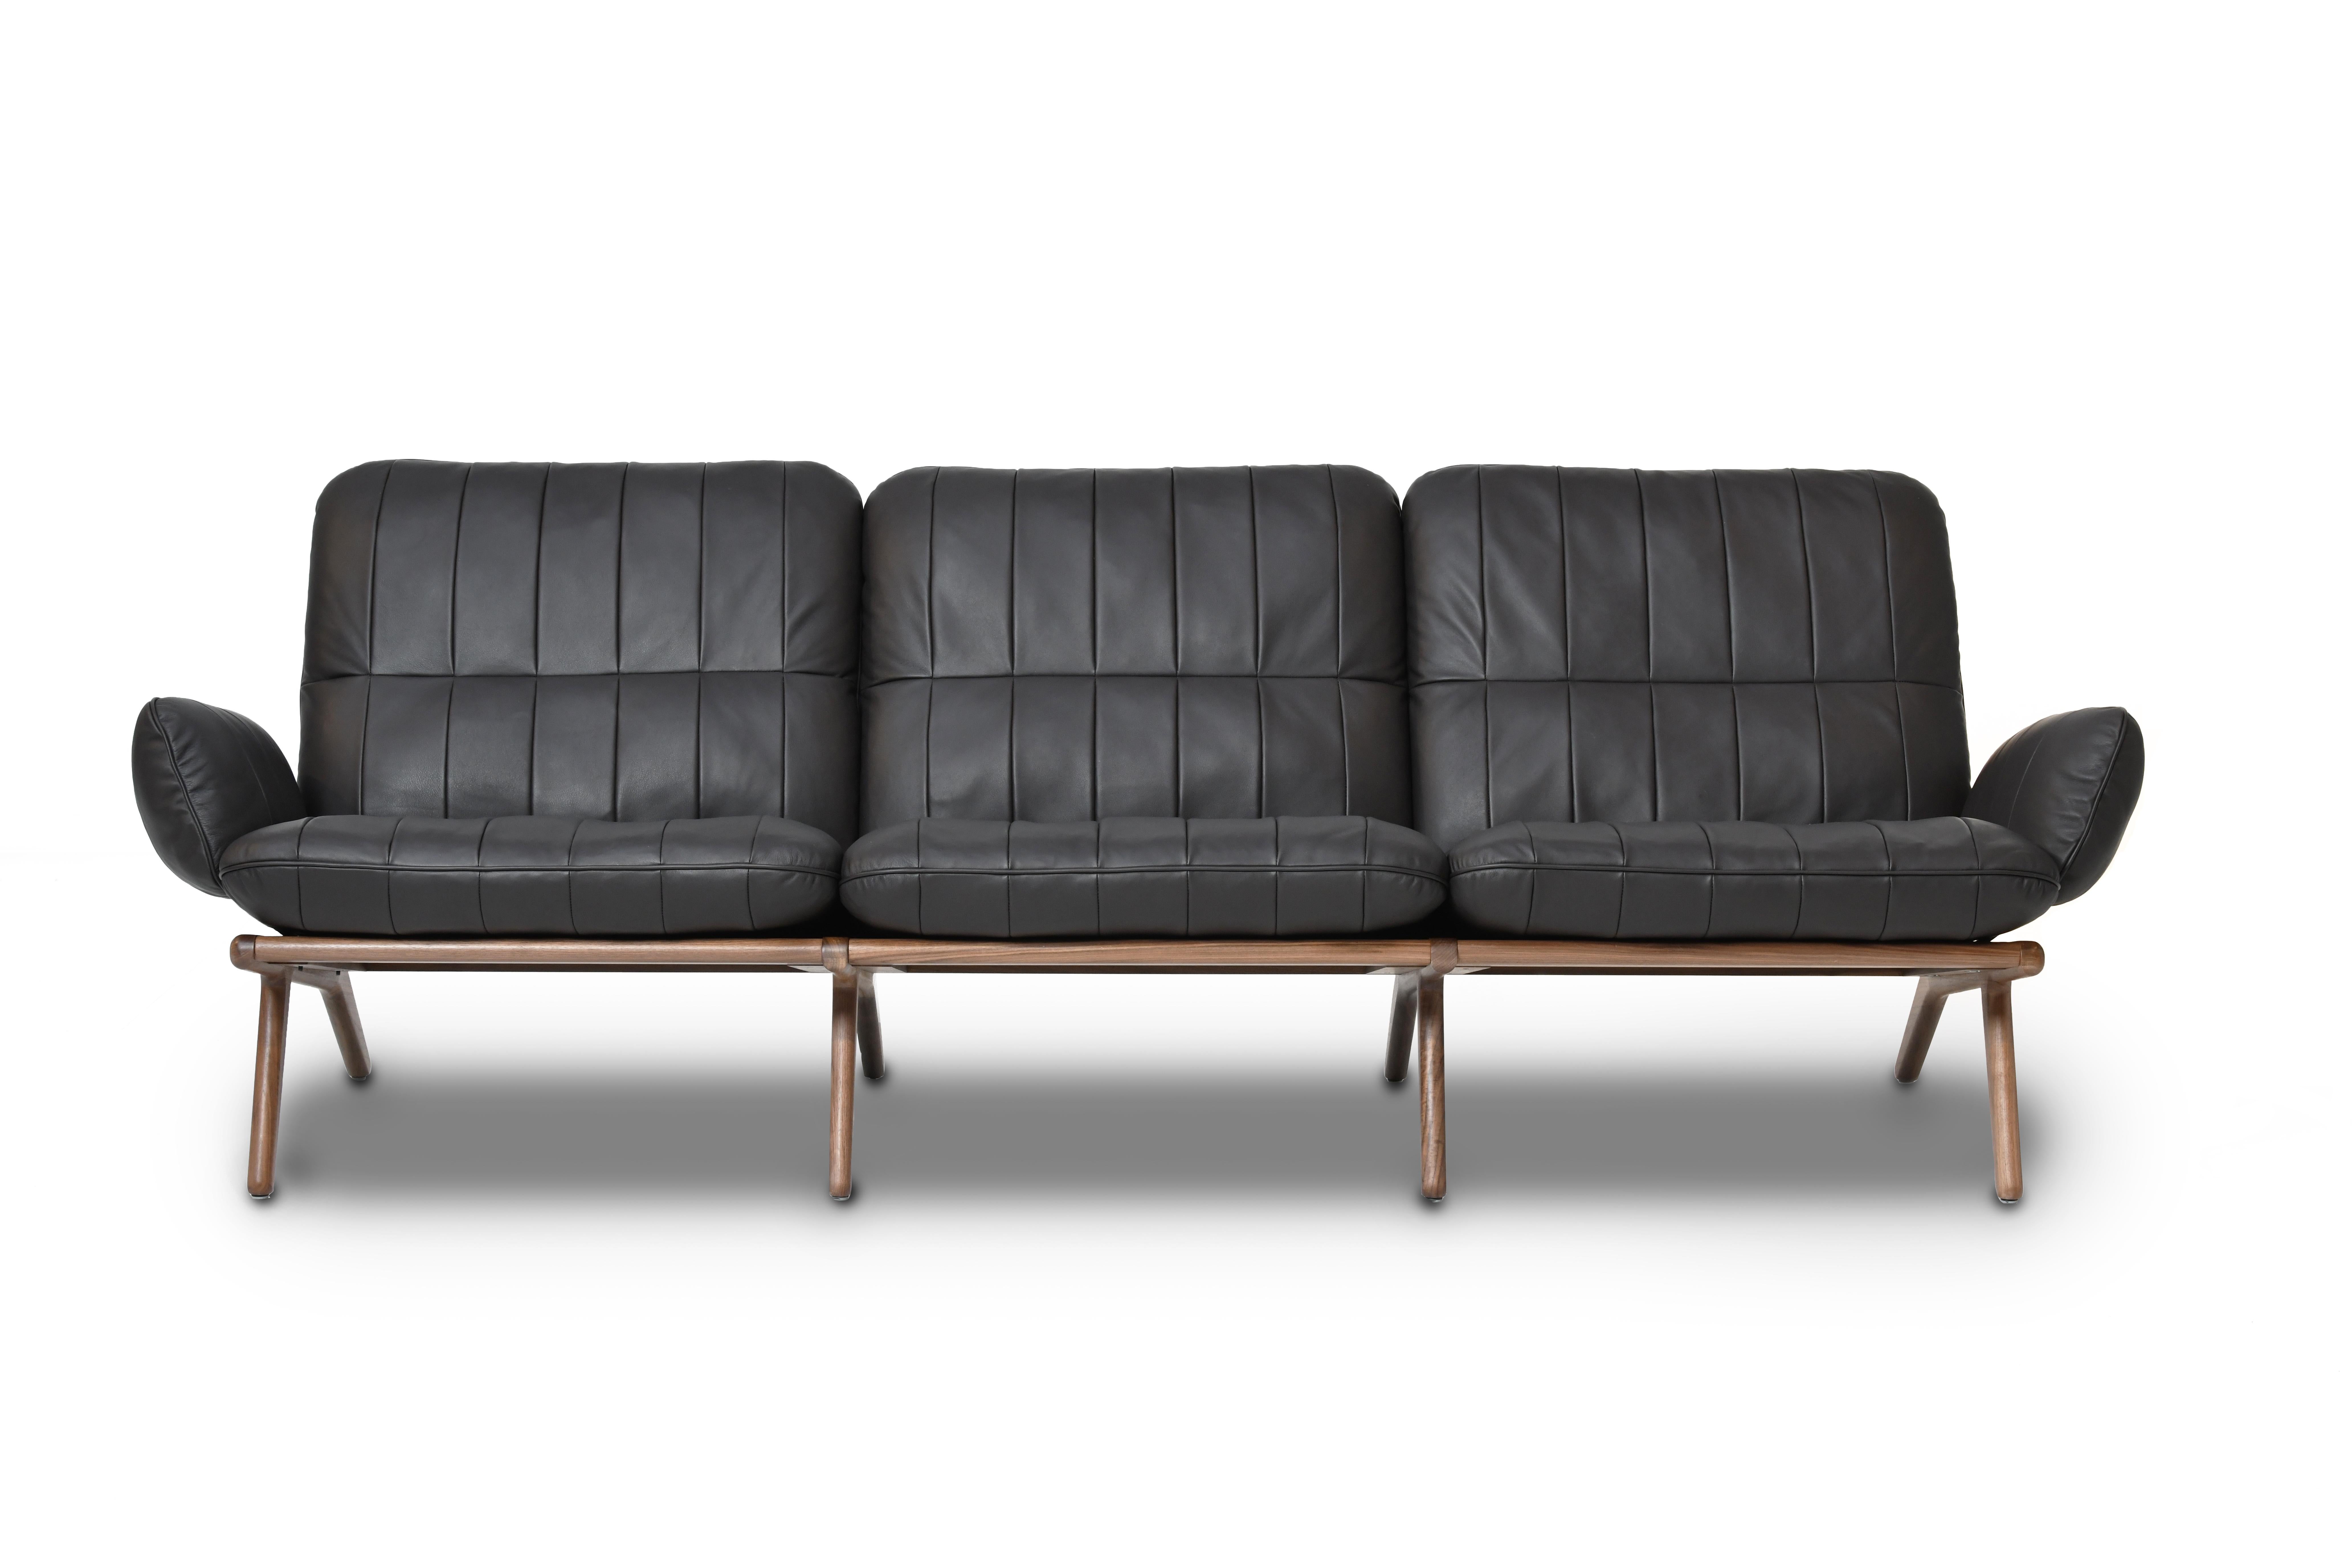 DS-531 sofa by De Sede
Dimensions: D 55 x W 234 x H 80 cm
Materials: oak, leather

Prices may change according to the chosen materials and size. 

Simply beautiful. Or beautifully simple.
 
Whoever settles into seating furniture from the